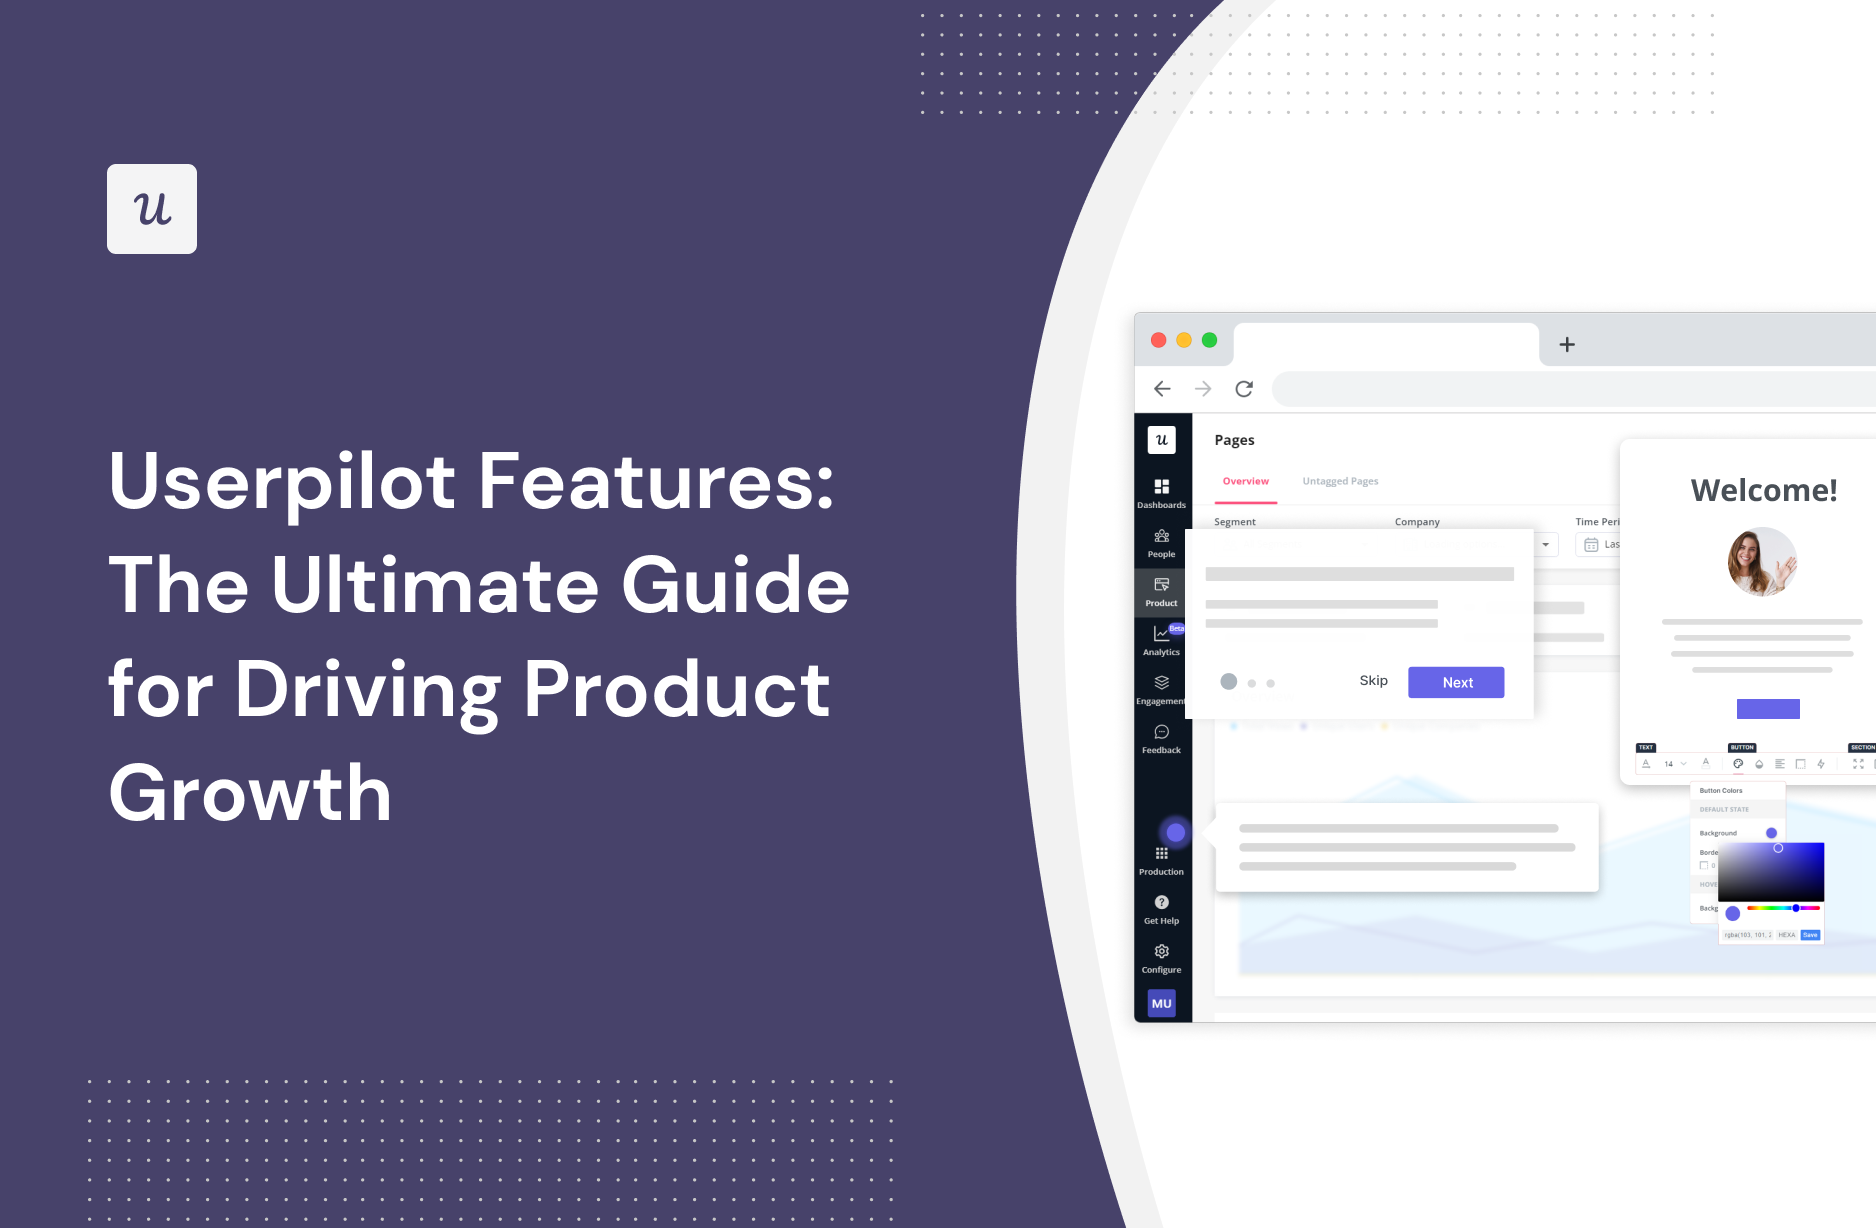 Userpilot Features: The Ultimate Guide for Driving Product Growth